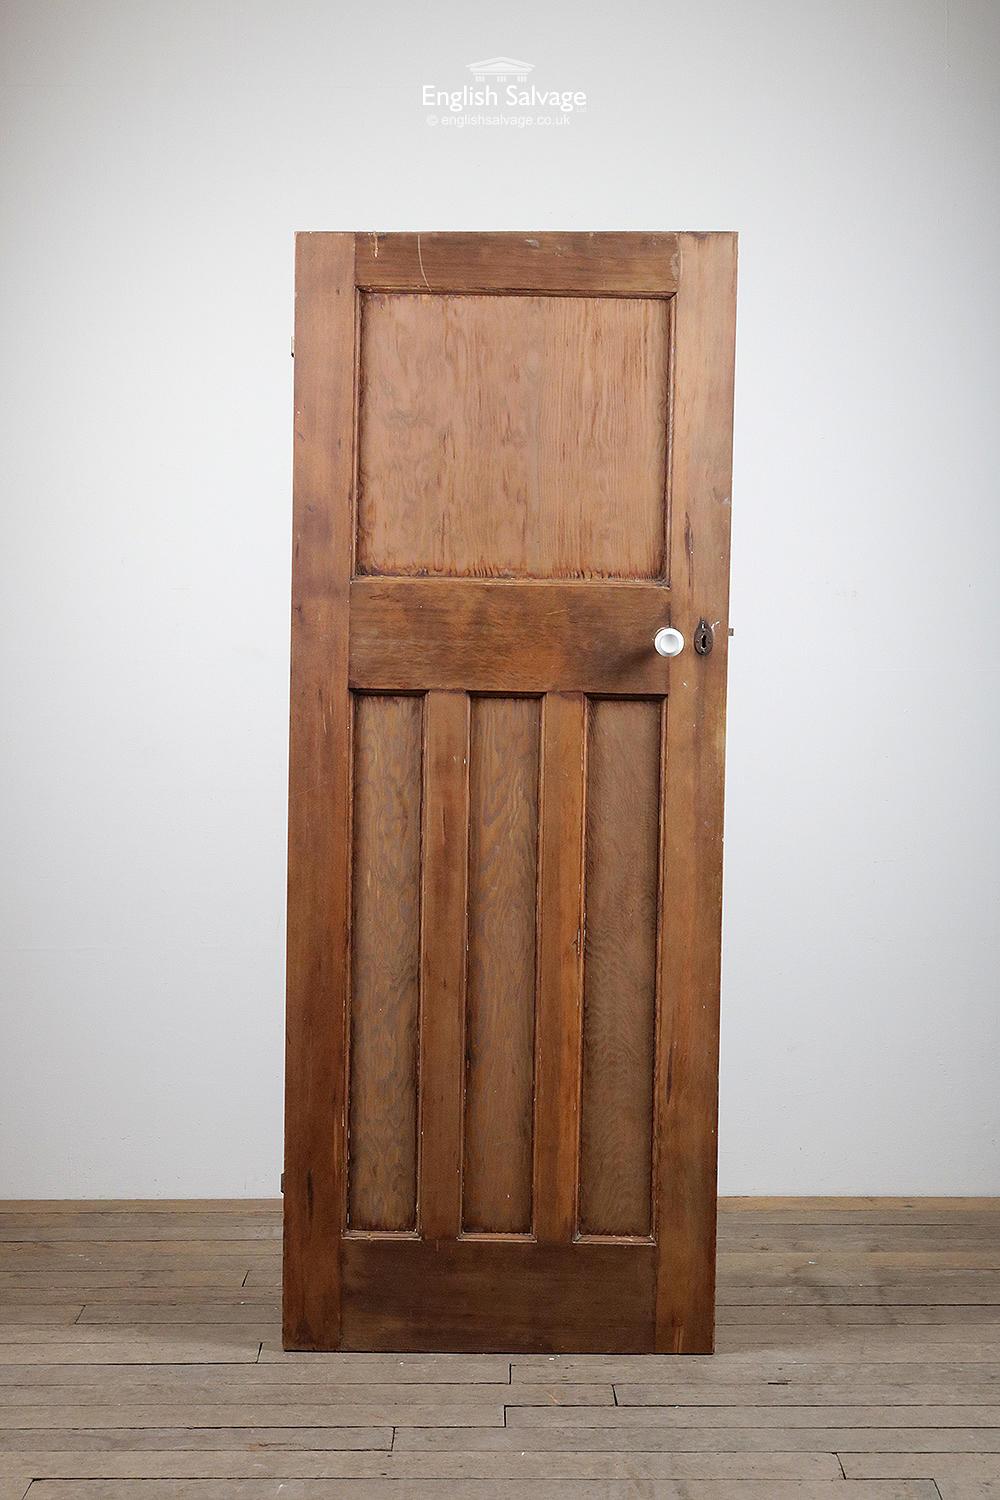 Reclaimed one over three internal door. Dark stained softwood with ply panels. Cut at the top and bottom, height varies from 194.6cm-195cm. Old lock and doorknobs, two barrel hinges.